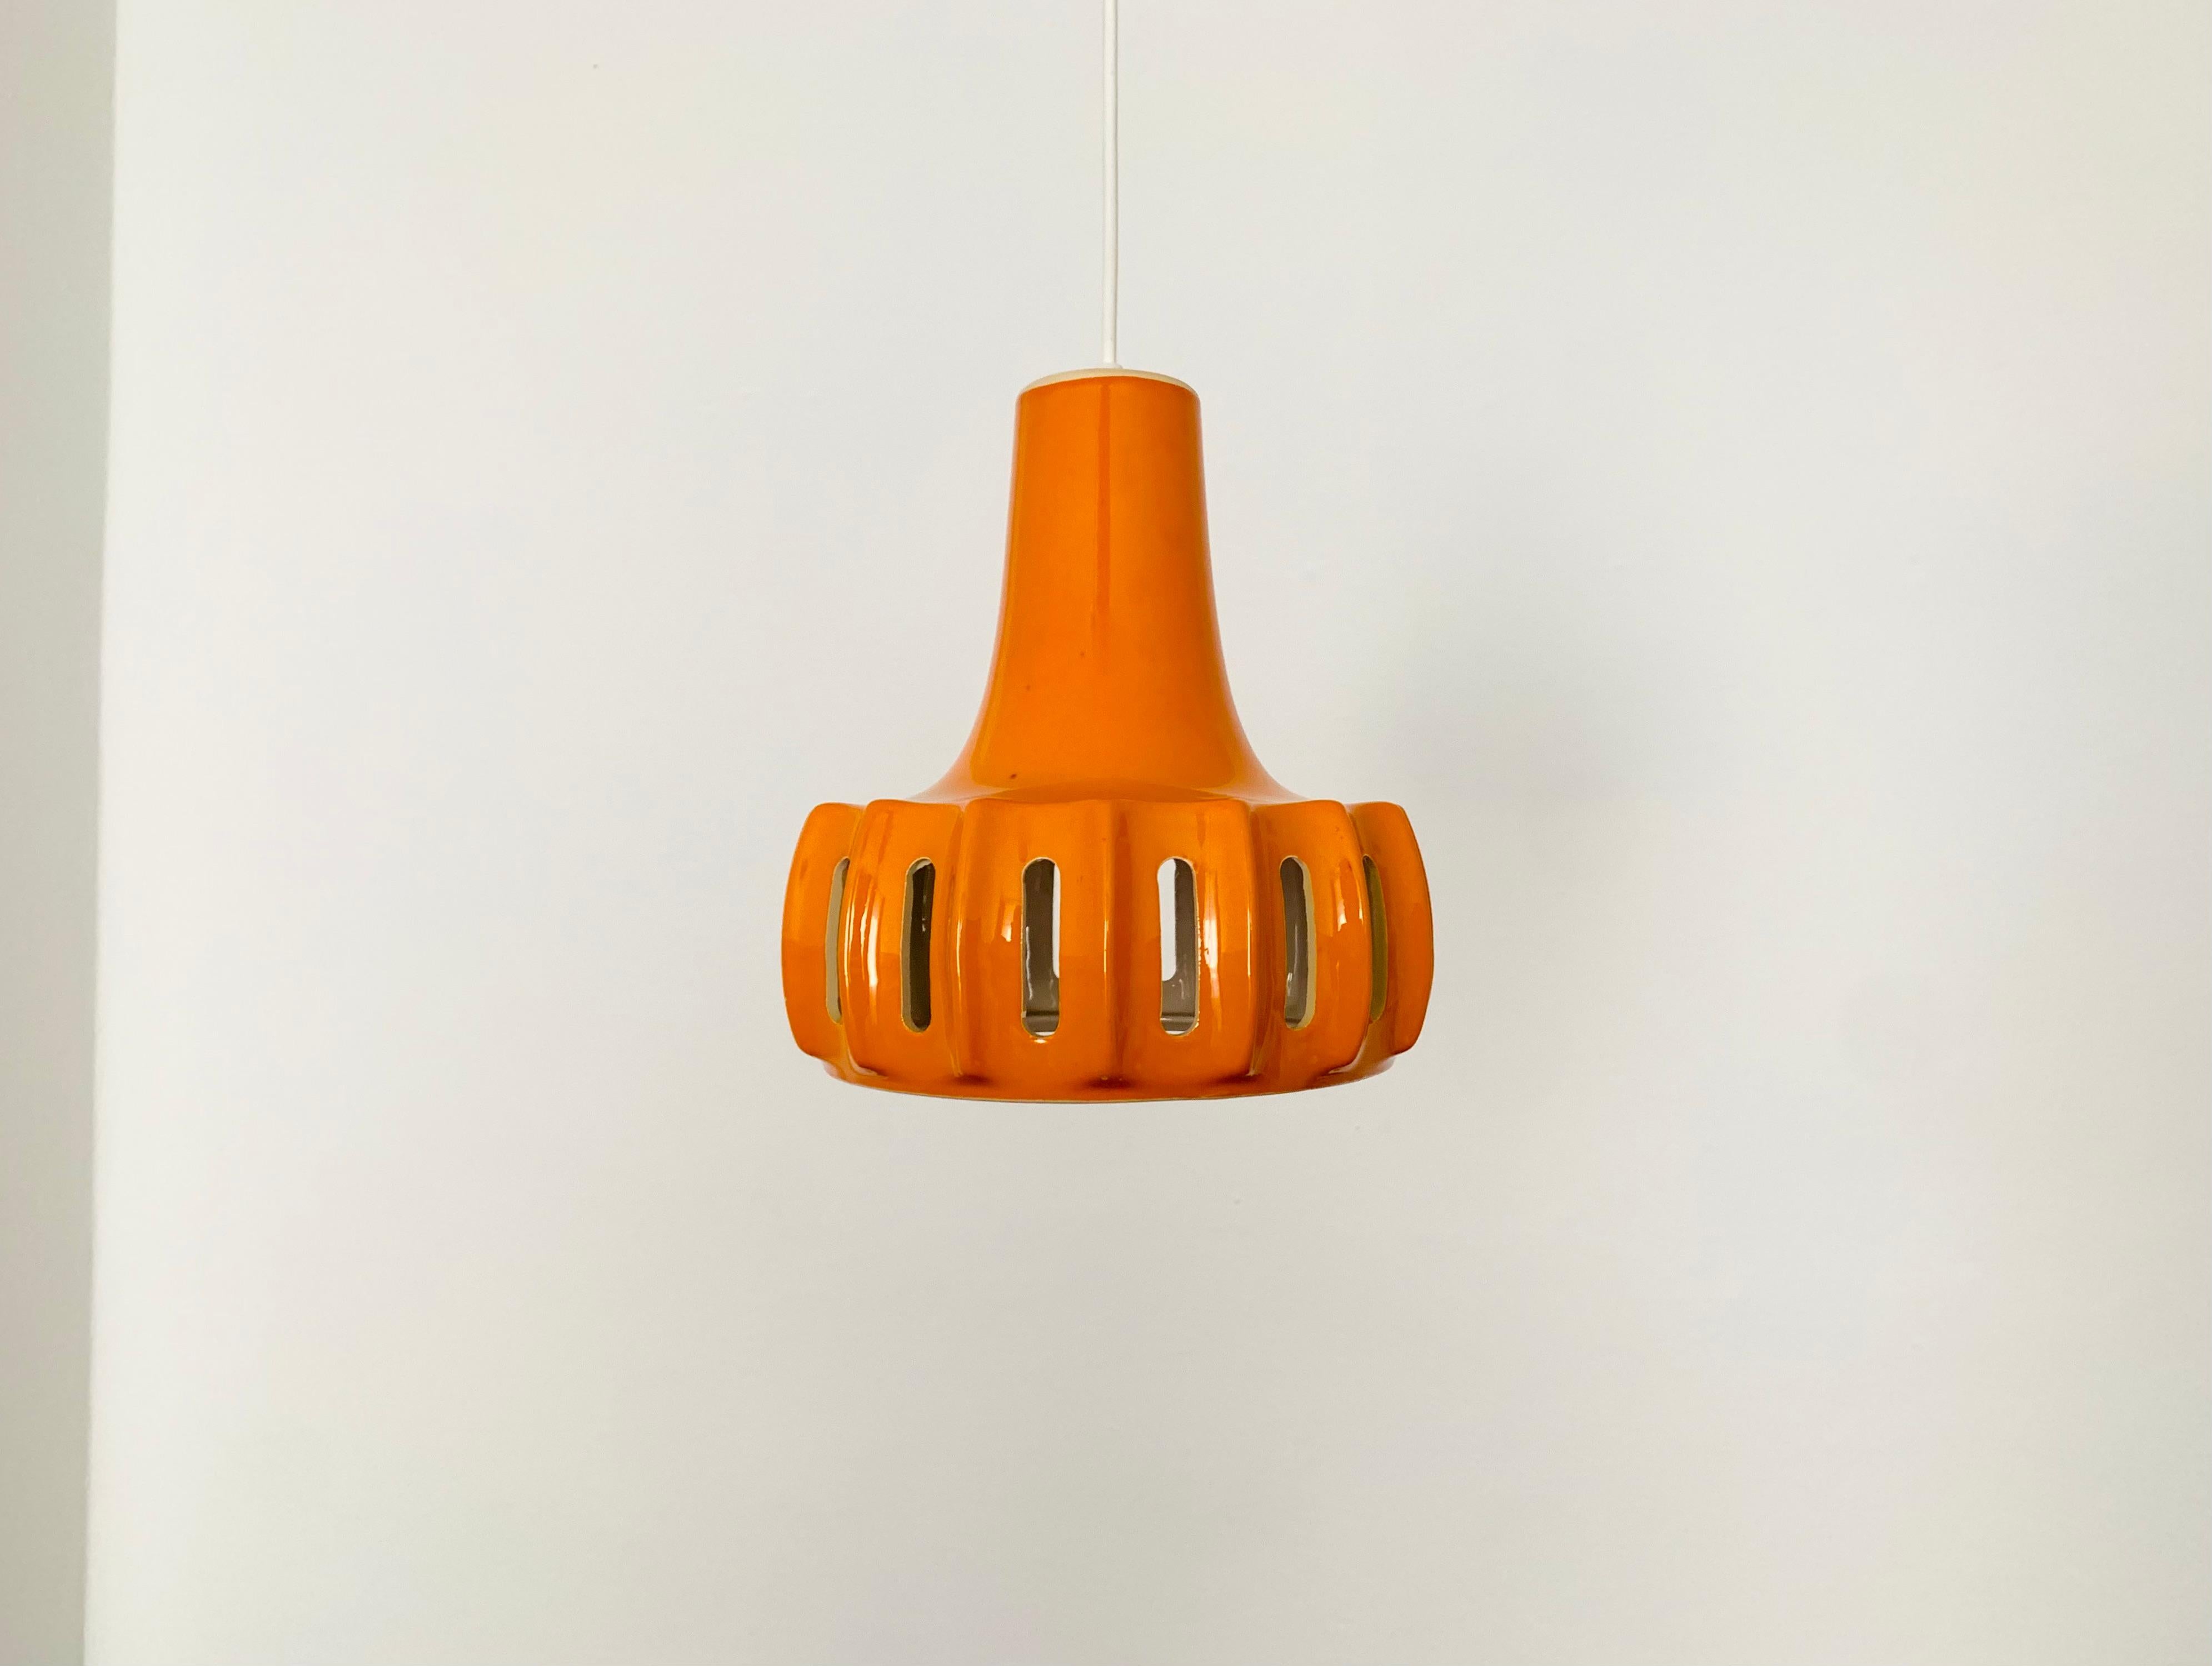 Very nice little ceramic pendant lamp from the 1960s.
Wonderful design and finish.
The lamp with the hand-painted glaze is a real eye-catcher.
A beautiful play of light is created.

Condition:

Very good vintage condition with slight signs of